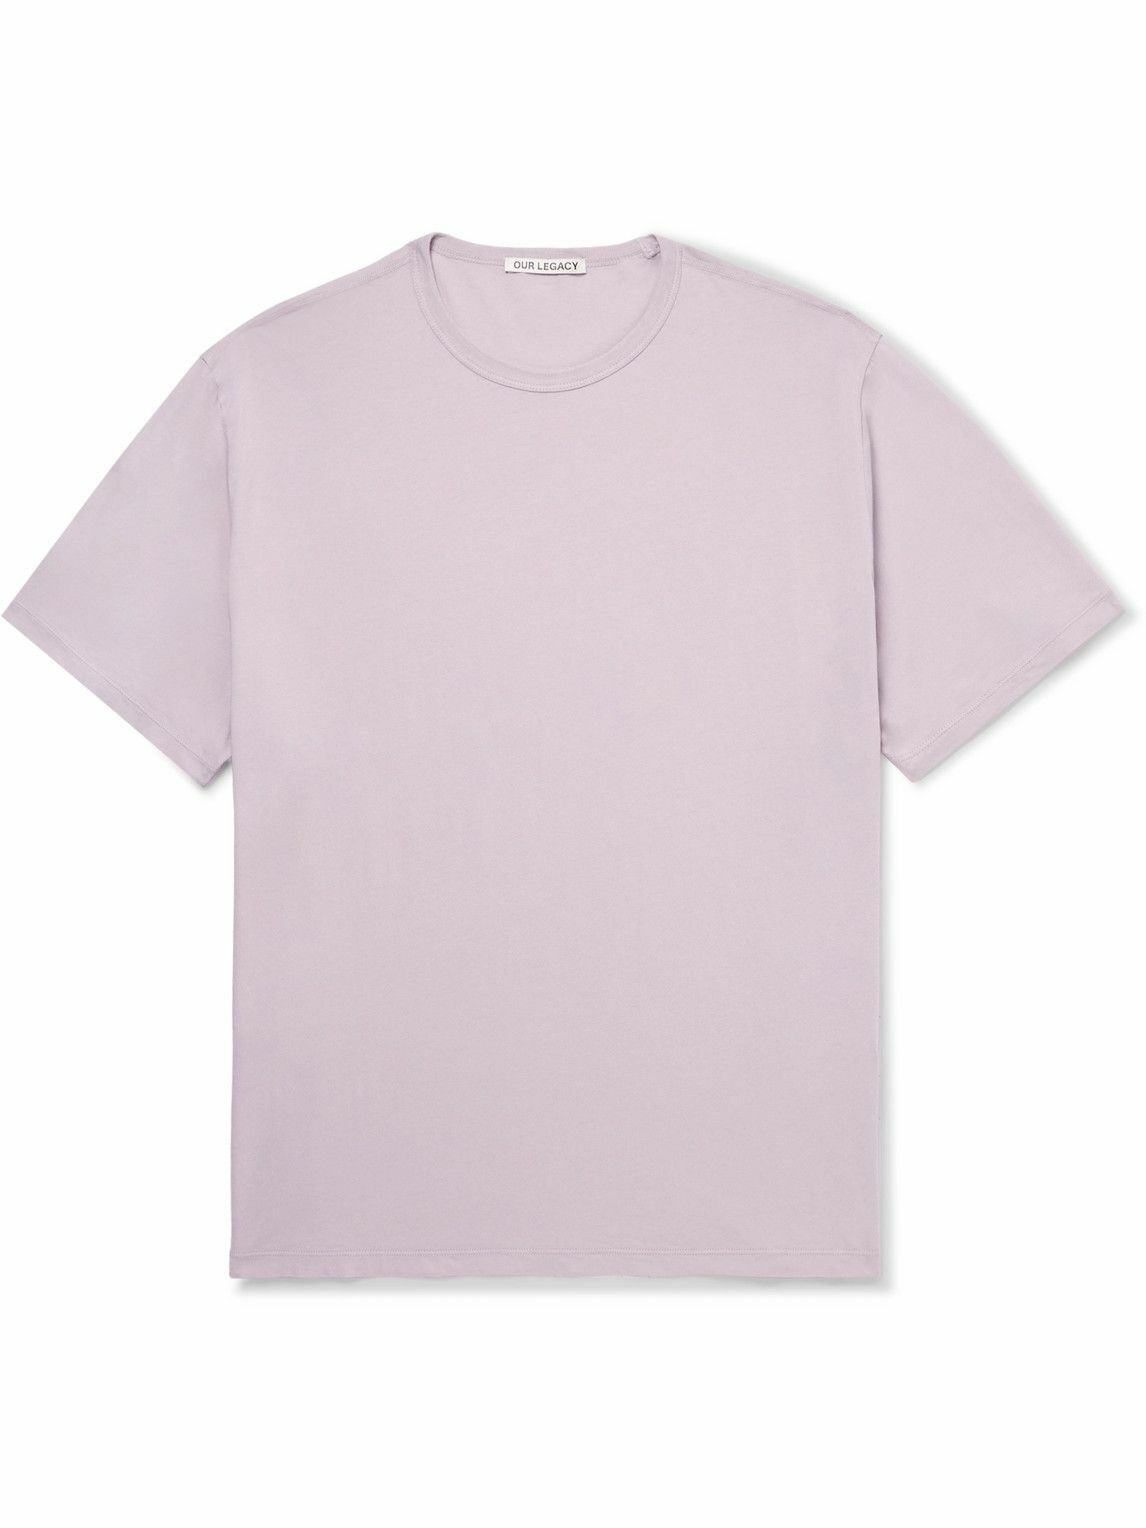 Photo: Our Legacy - New Box Cotton-Jersey T-Shirt - Pink